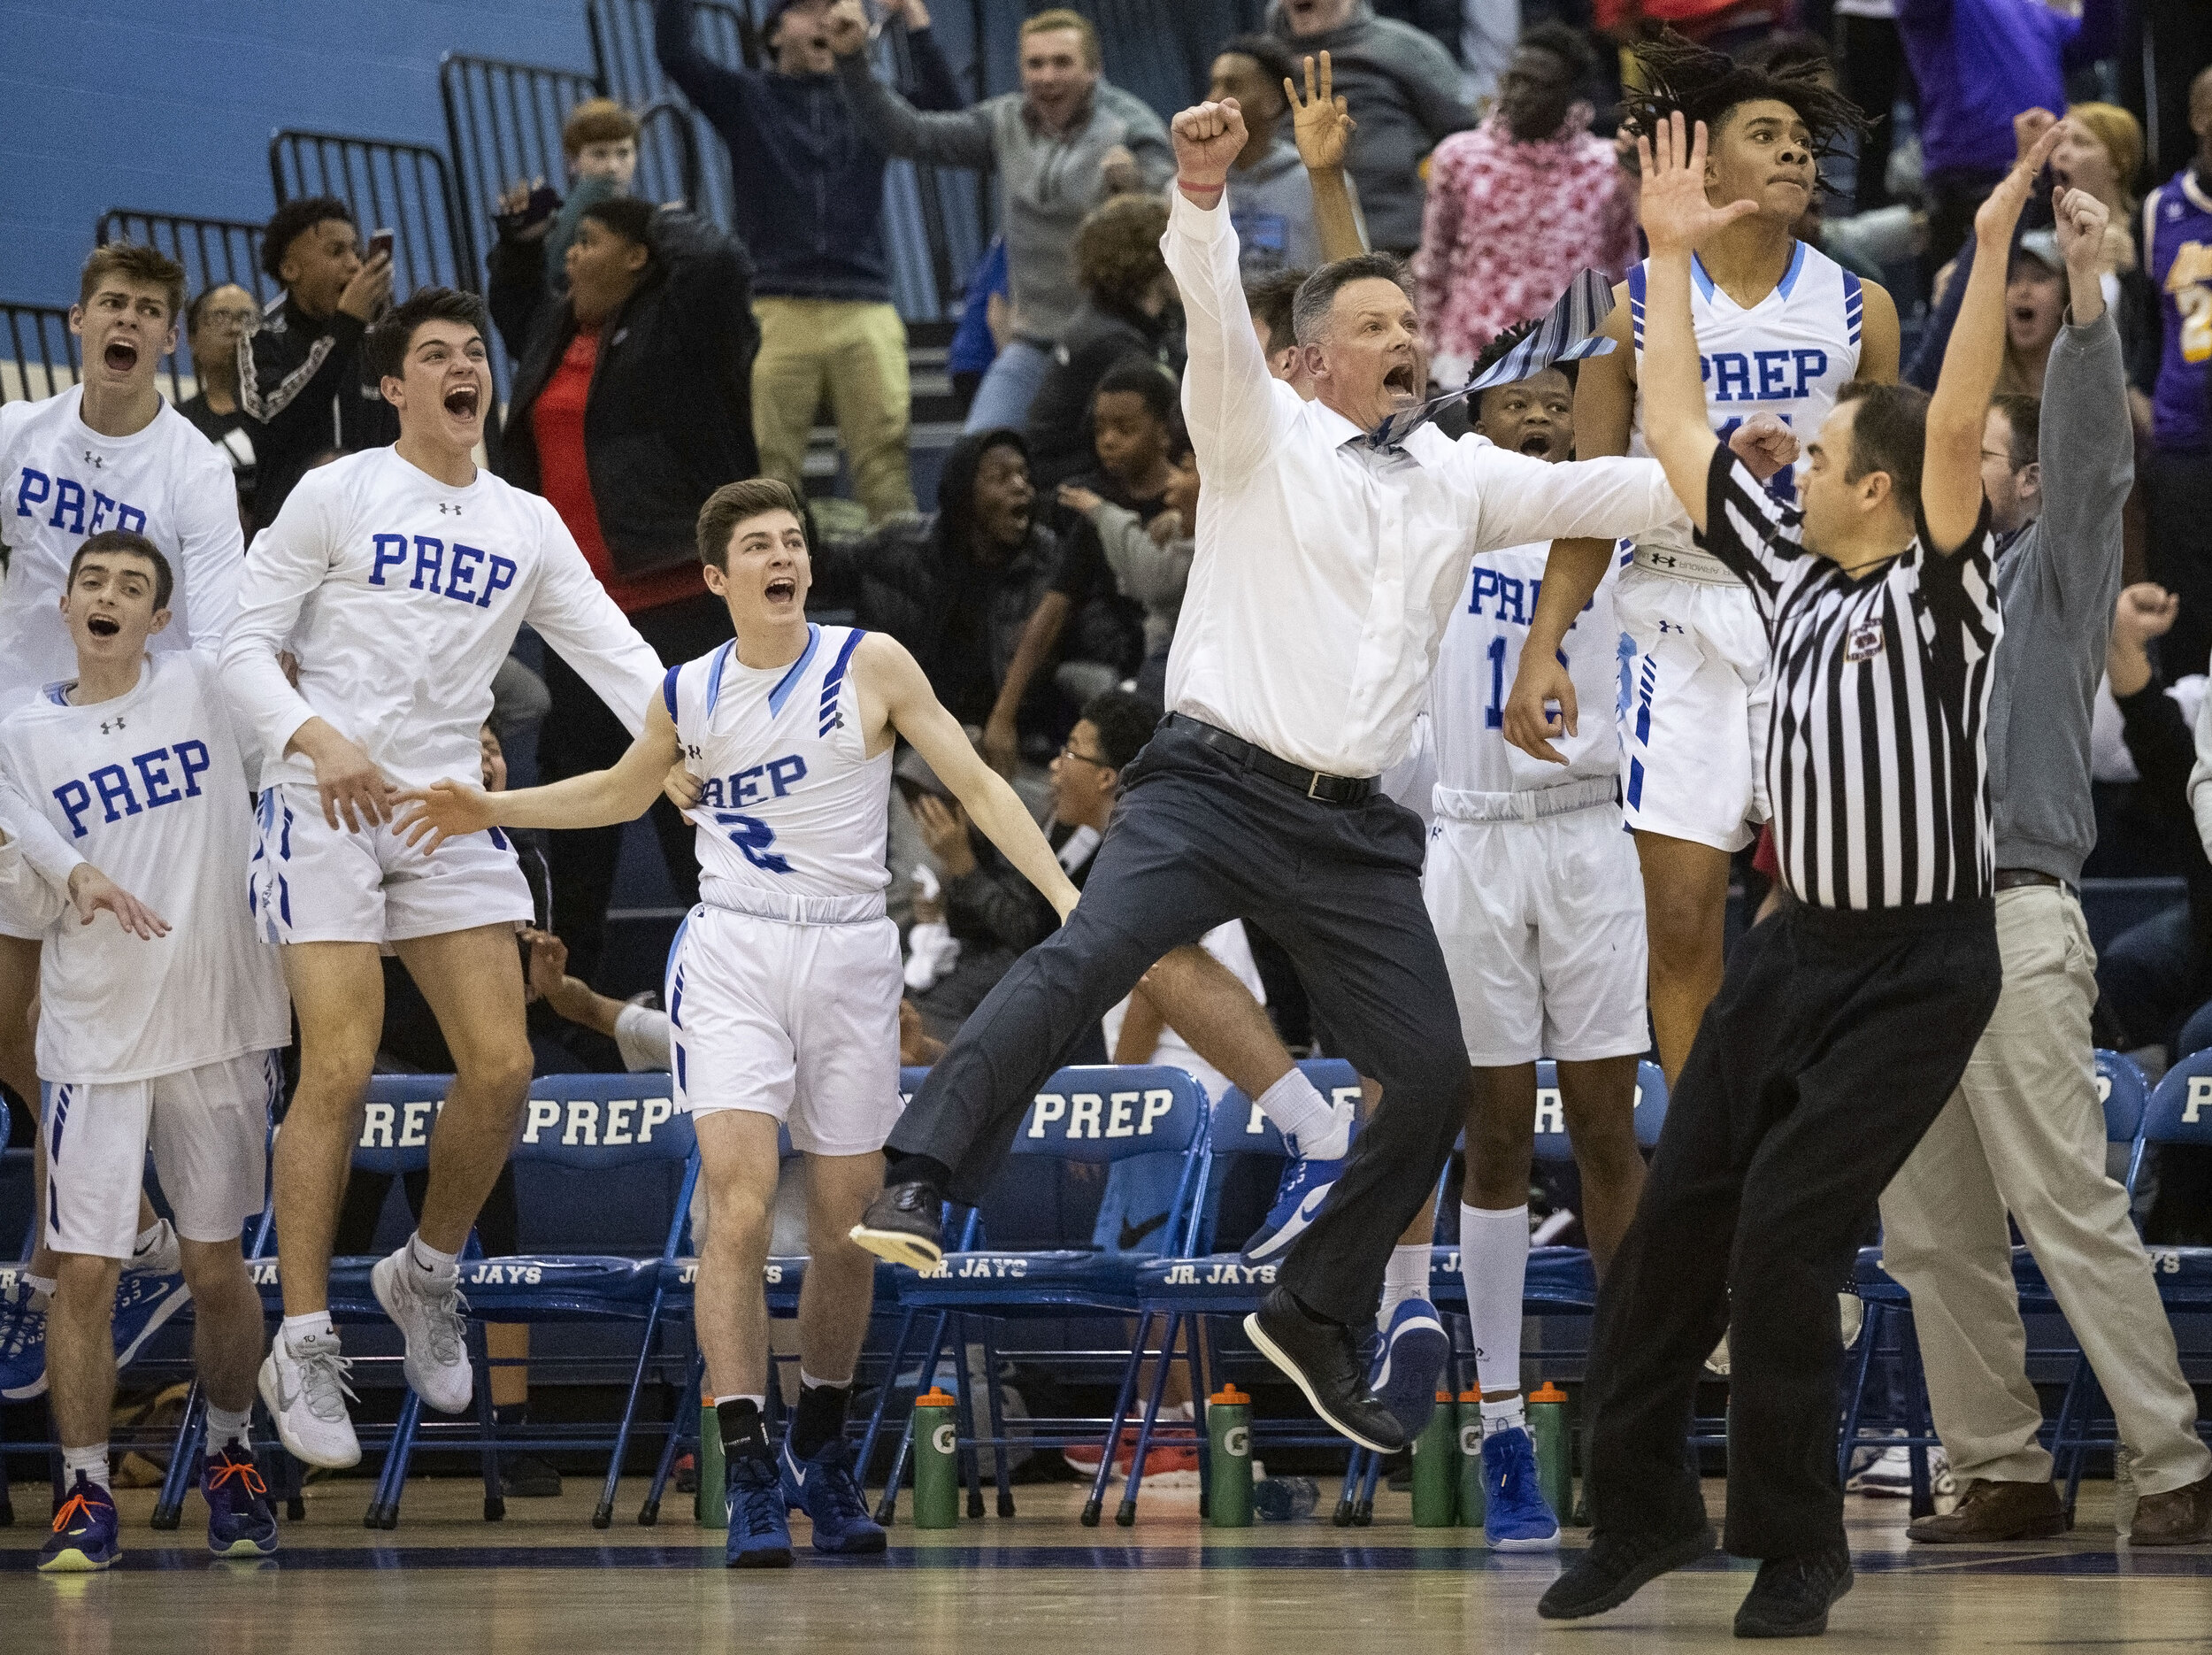  Creighton Prep head coach Josh Luedtke and his team leap off the bench after a buzzer-beater shot by Spencer ‘showtime’ Schomers on Friday, January 31, 2020, at Creighton Preparatory School in Omaha, Nebraska. With 0.7 seconds left on the clock, Sch